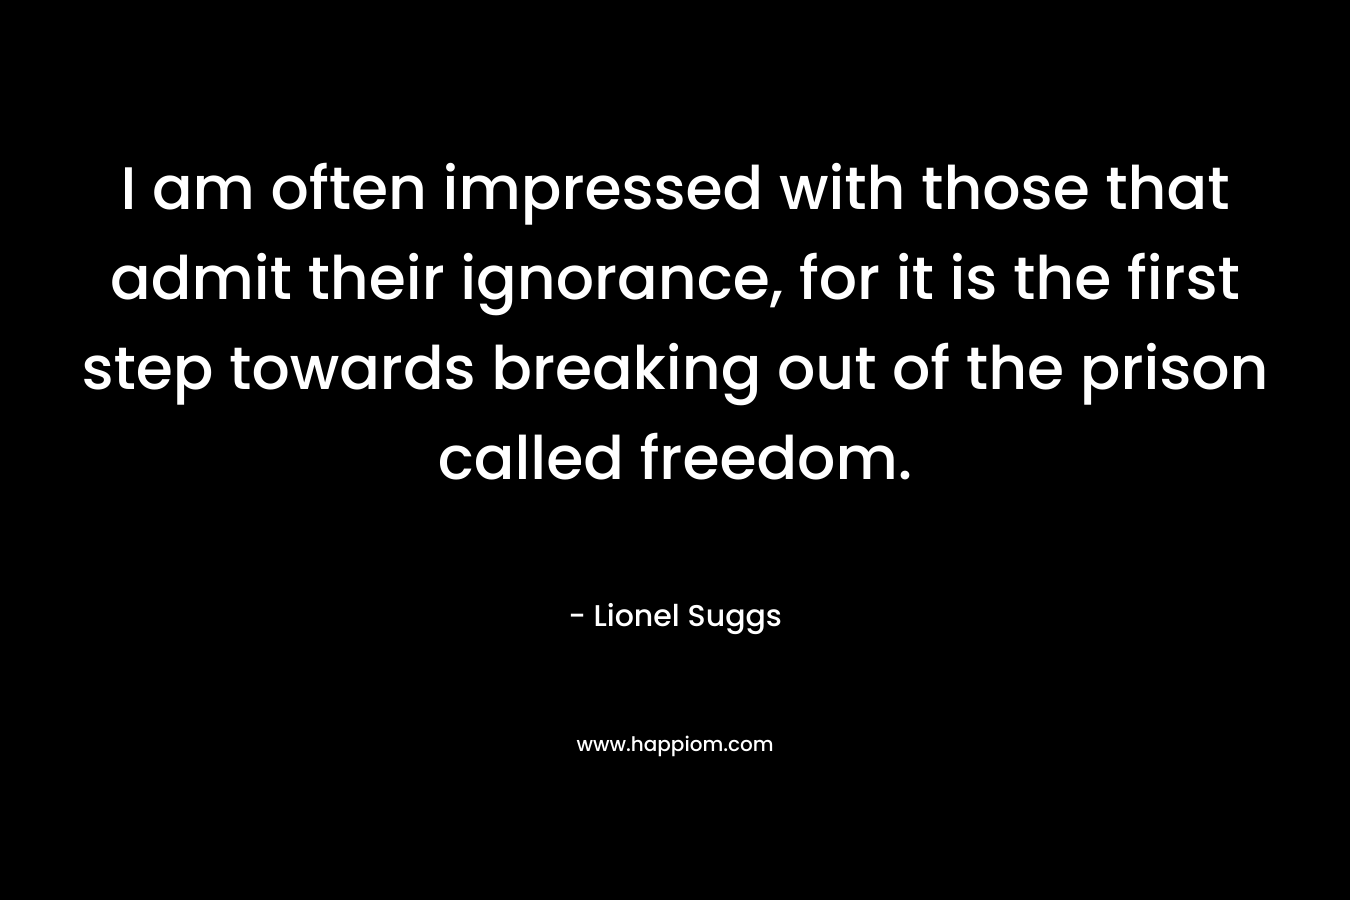 I am often impressed with those that admit their ignorance, for it is the first step towards breaking out of the prison called freedom. – Lionel Suggs